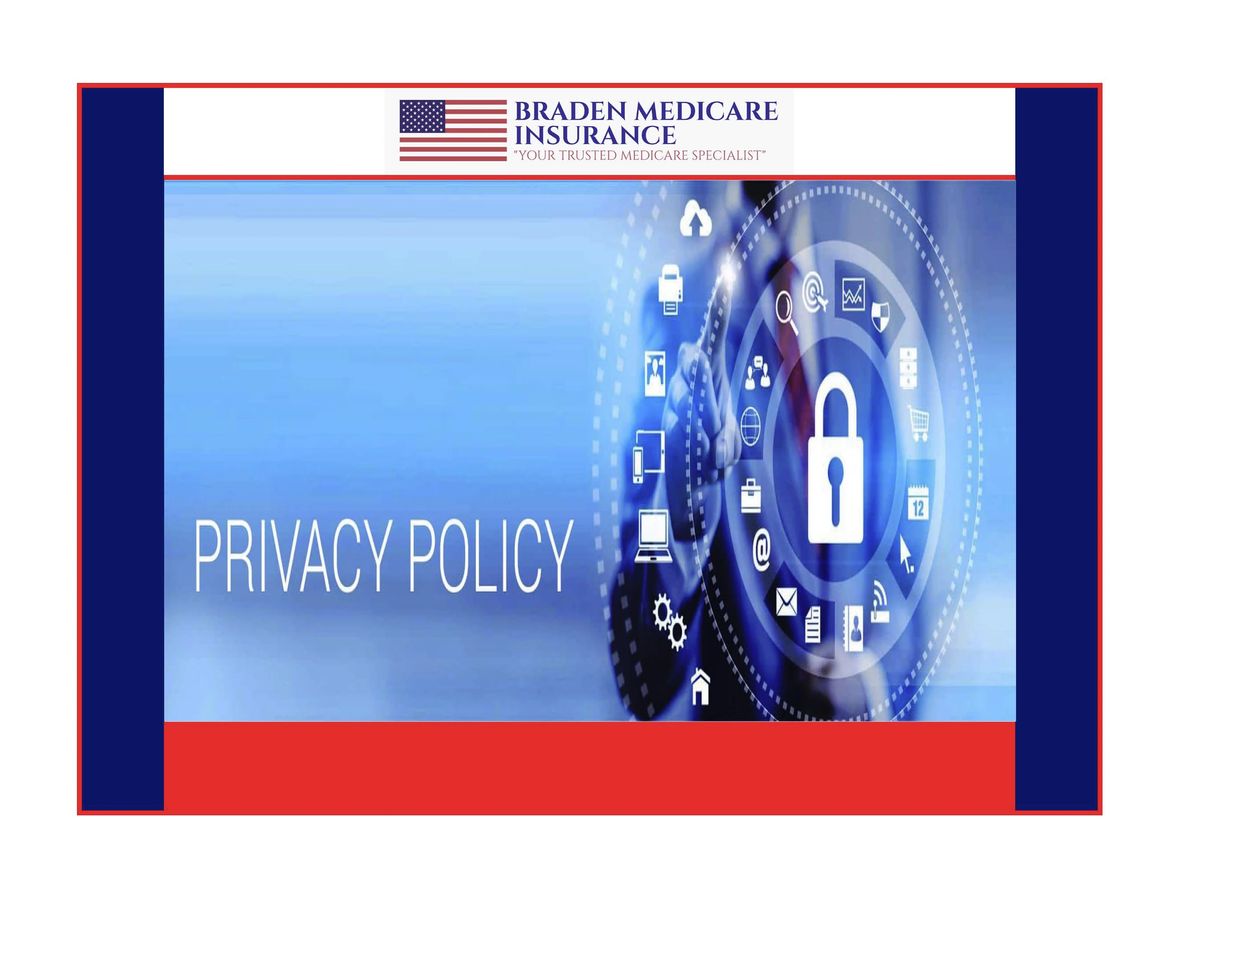 Braden Medicare Insurance Services Privacy Policy Poster